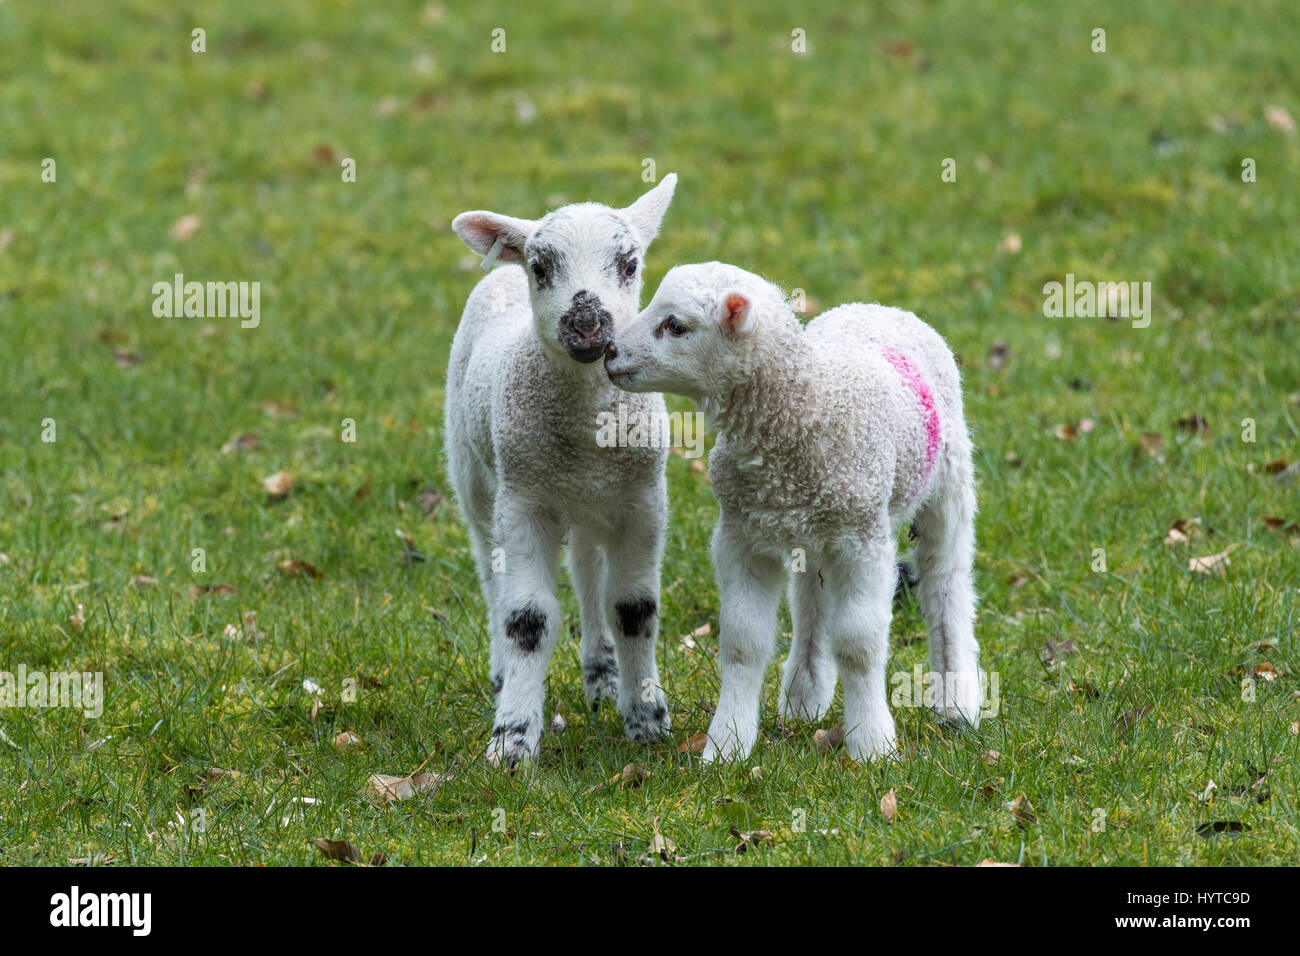 2 twin lambs standing close together in a farm field in springtime. One is gently nuzzling its friend, one is staring at the camera. England, GB, UK. Stock Photo